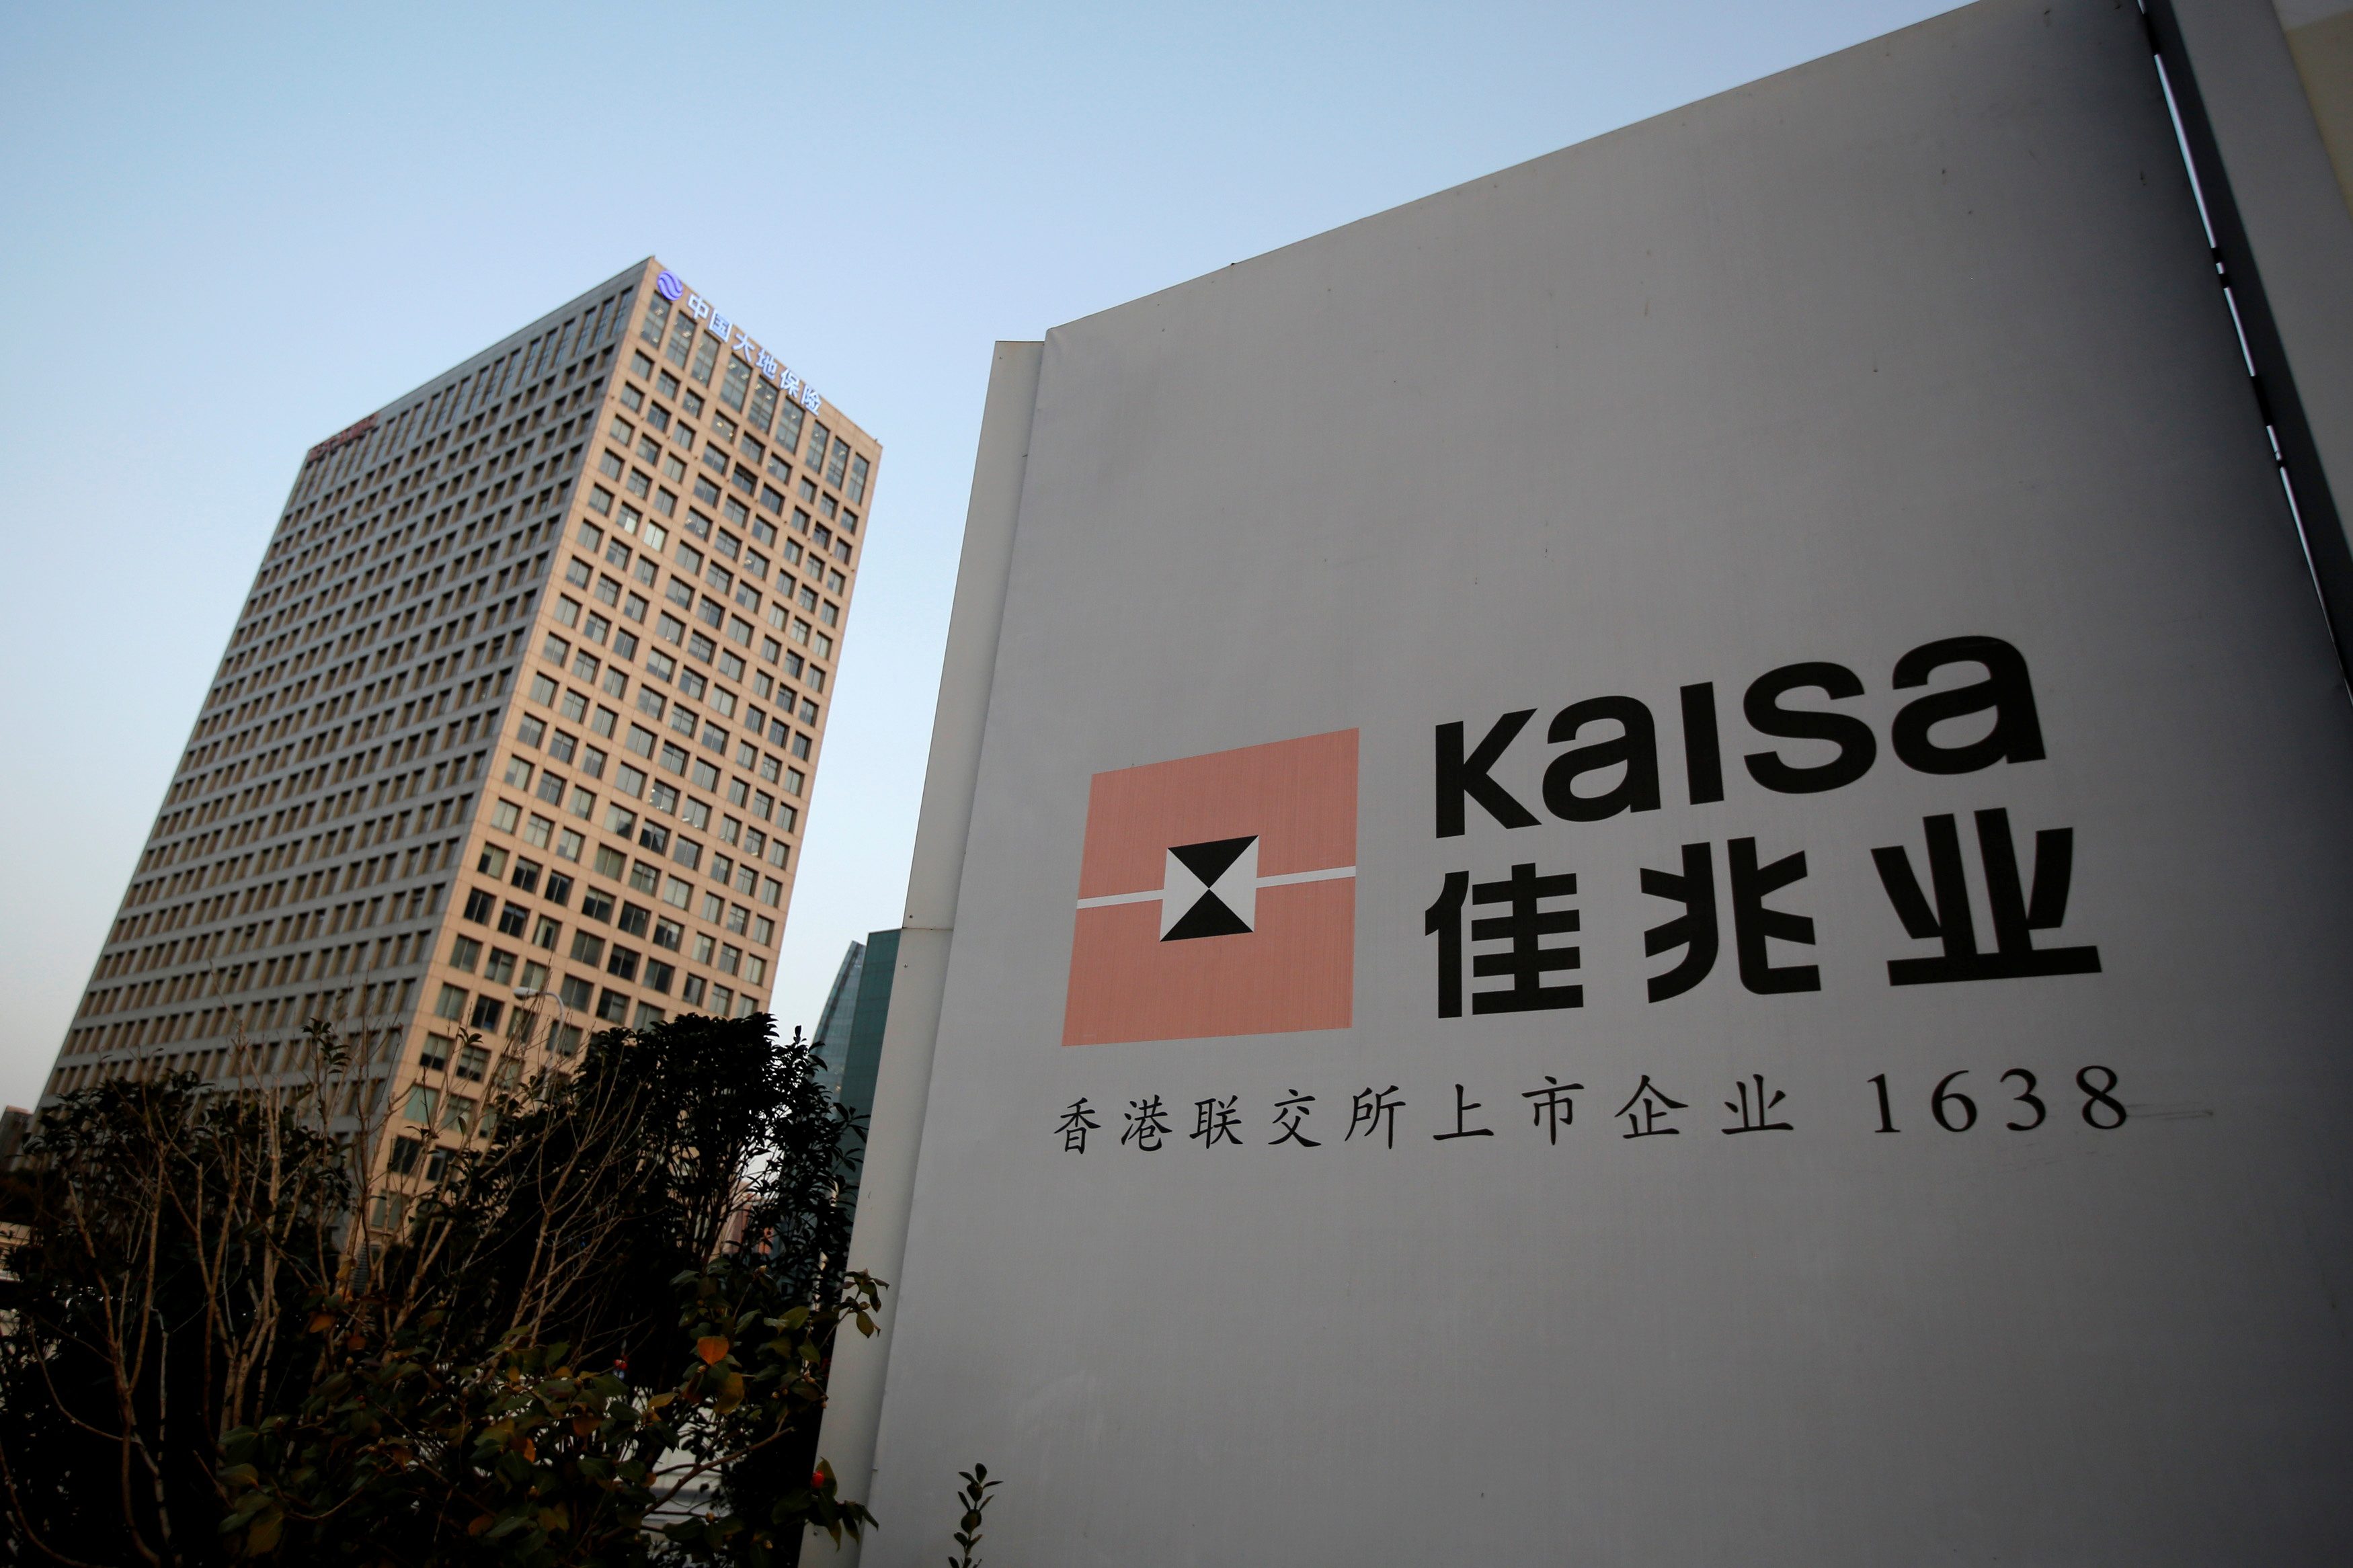 Some bondholders of China developer Kaisa tap adviser to help recover dues – source